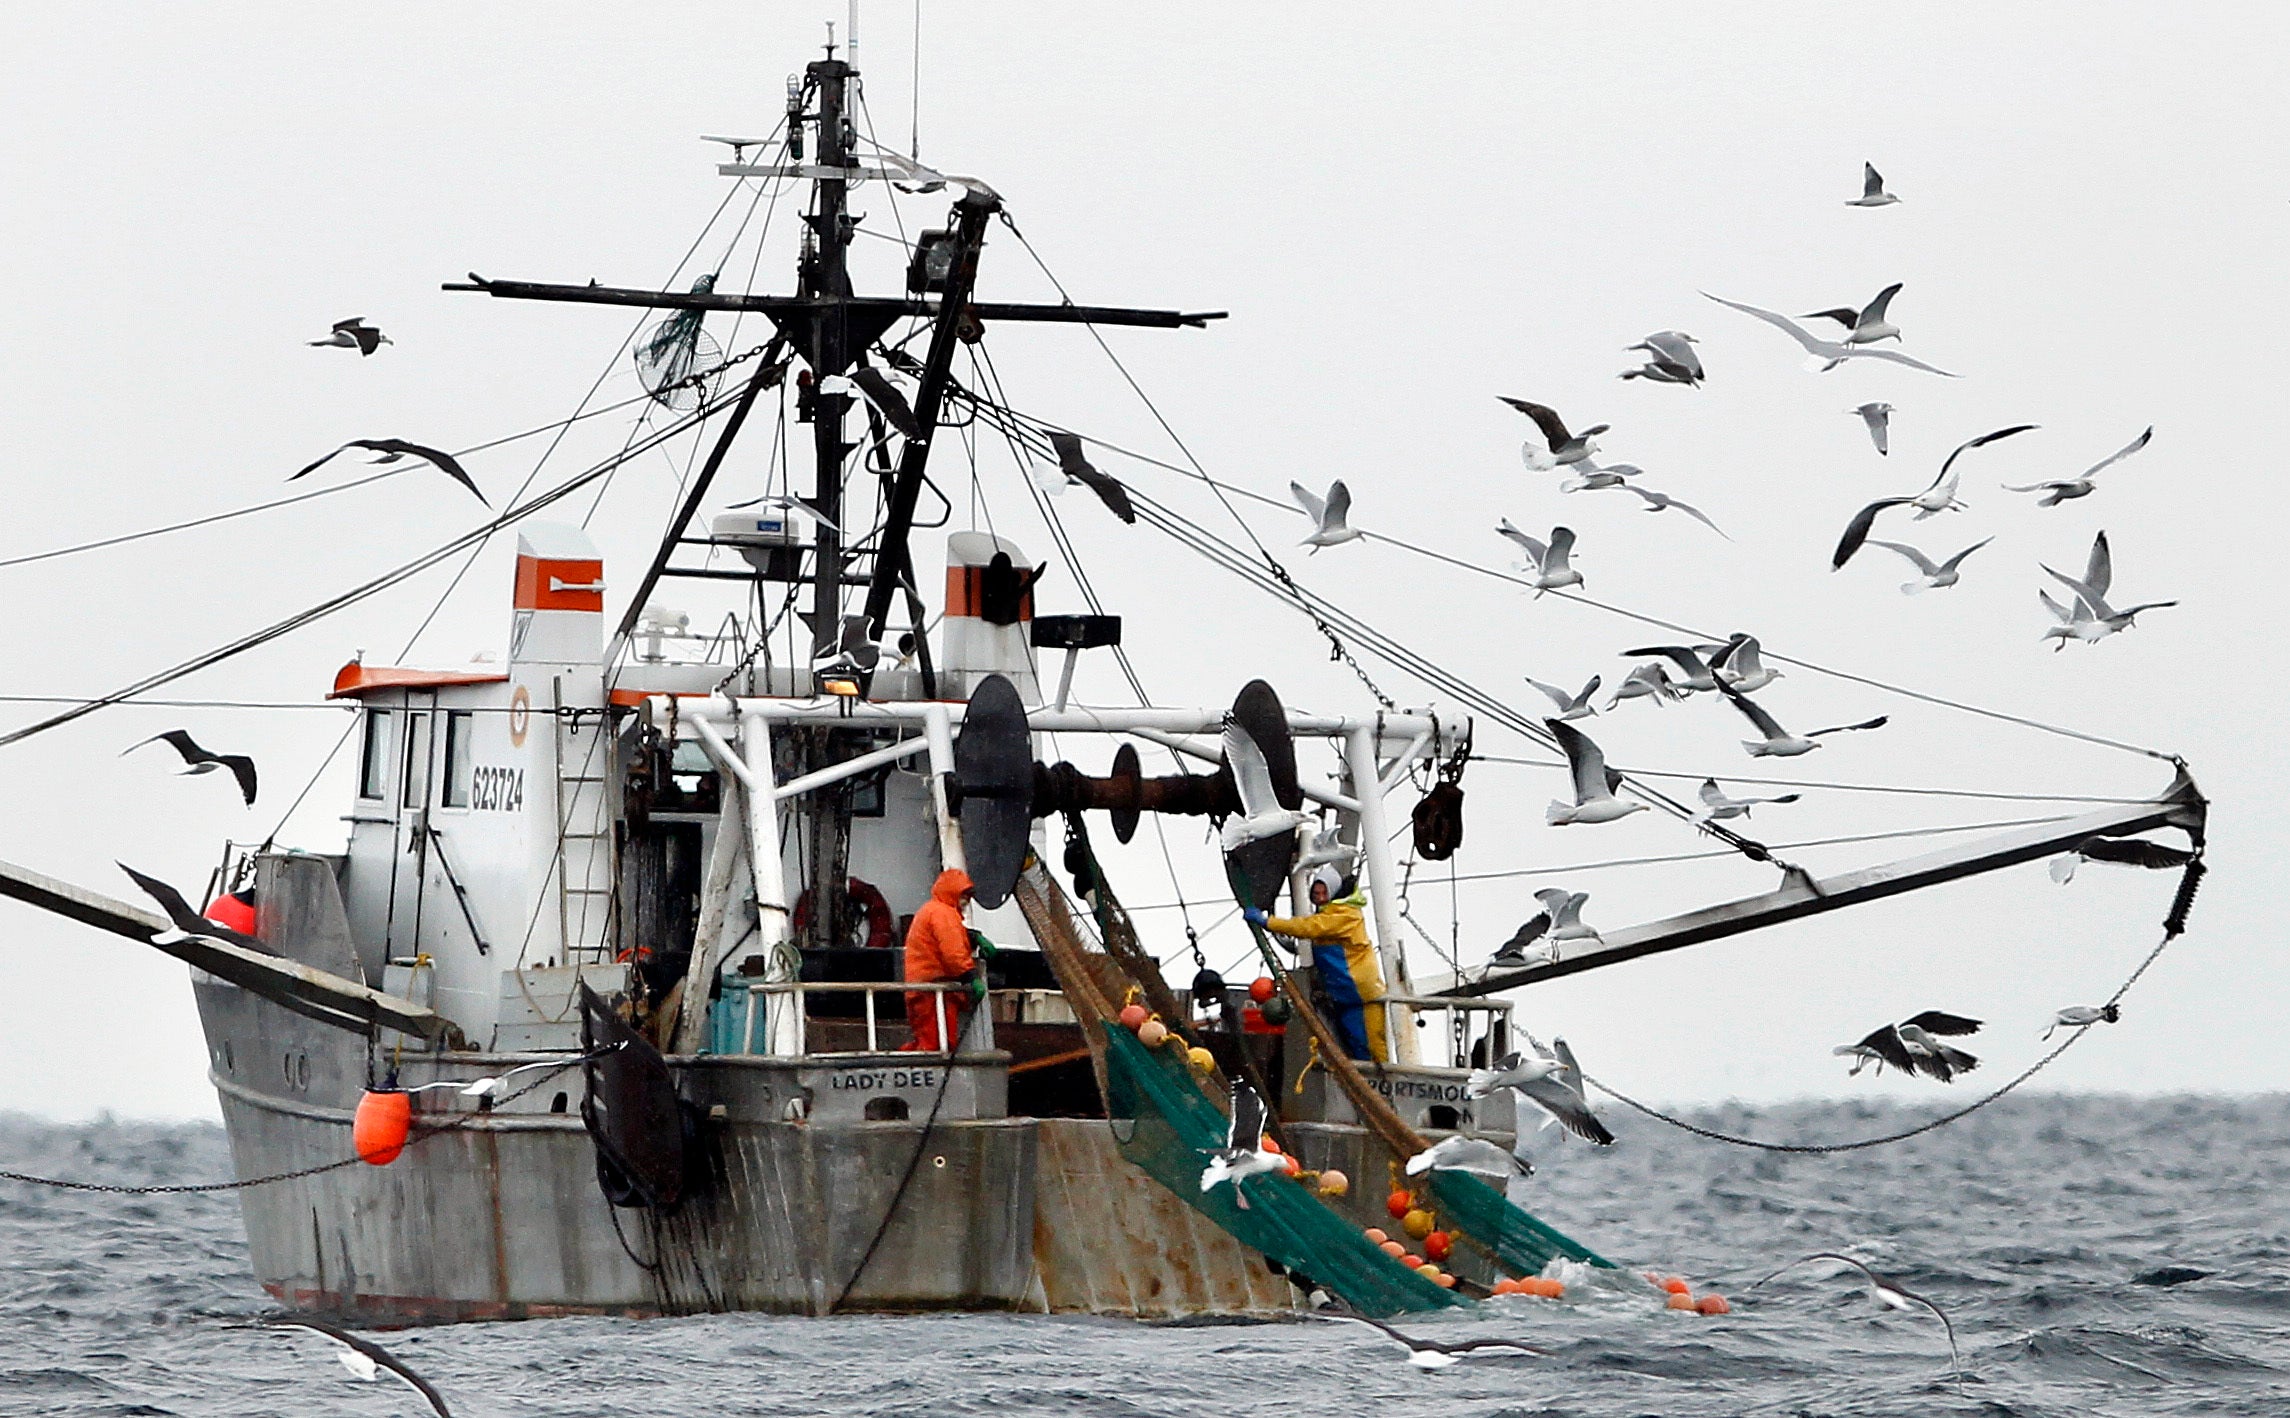 Justices to consider case involving fishing boat monitor pay